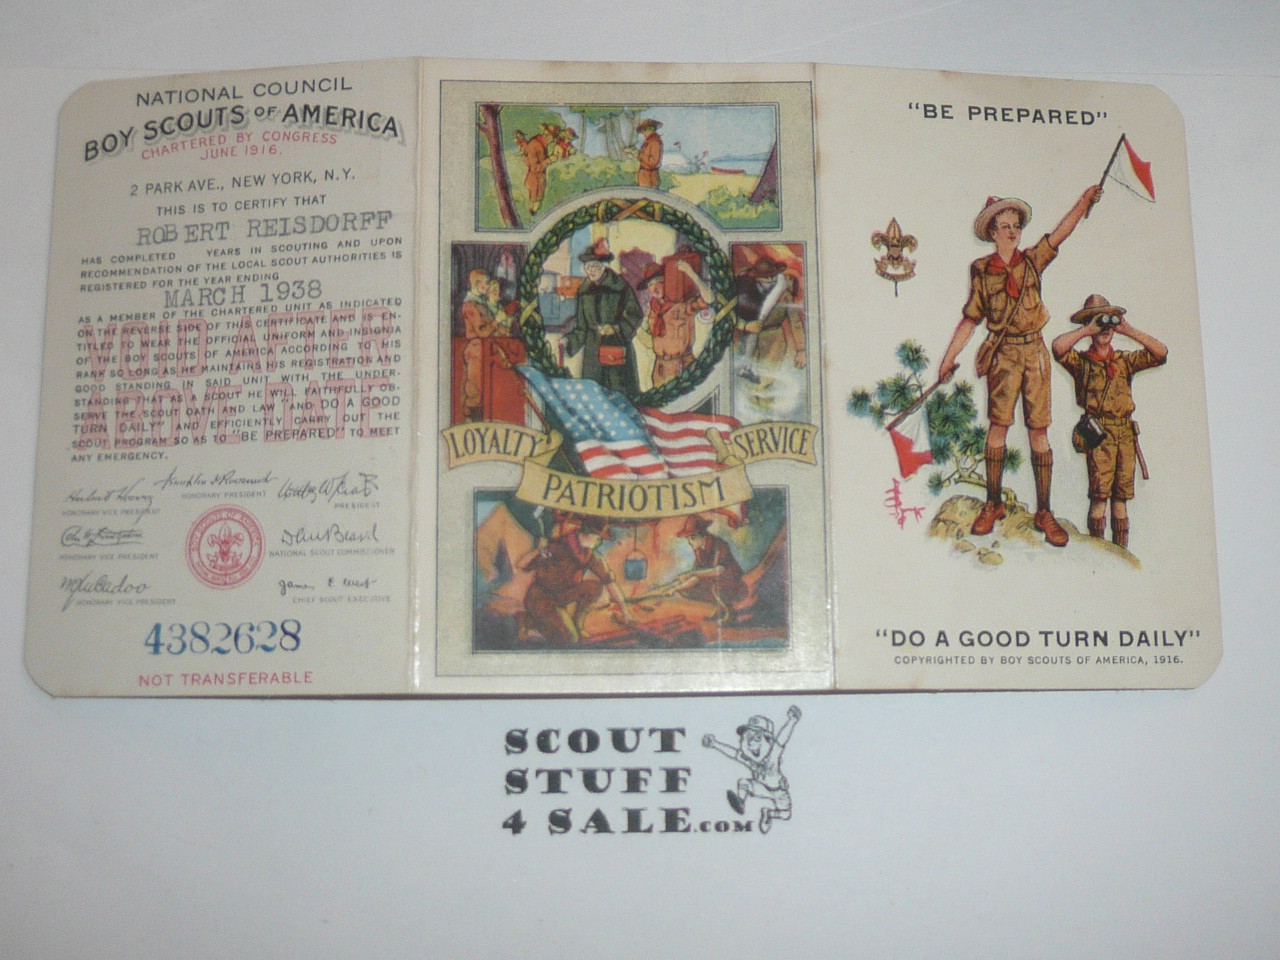 1938 Boy Scout Membership Card, 3-fold, with the Envelope, 7 signatures, expires March 1938, BSMC160